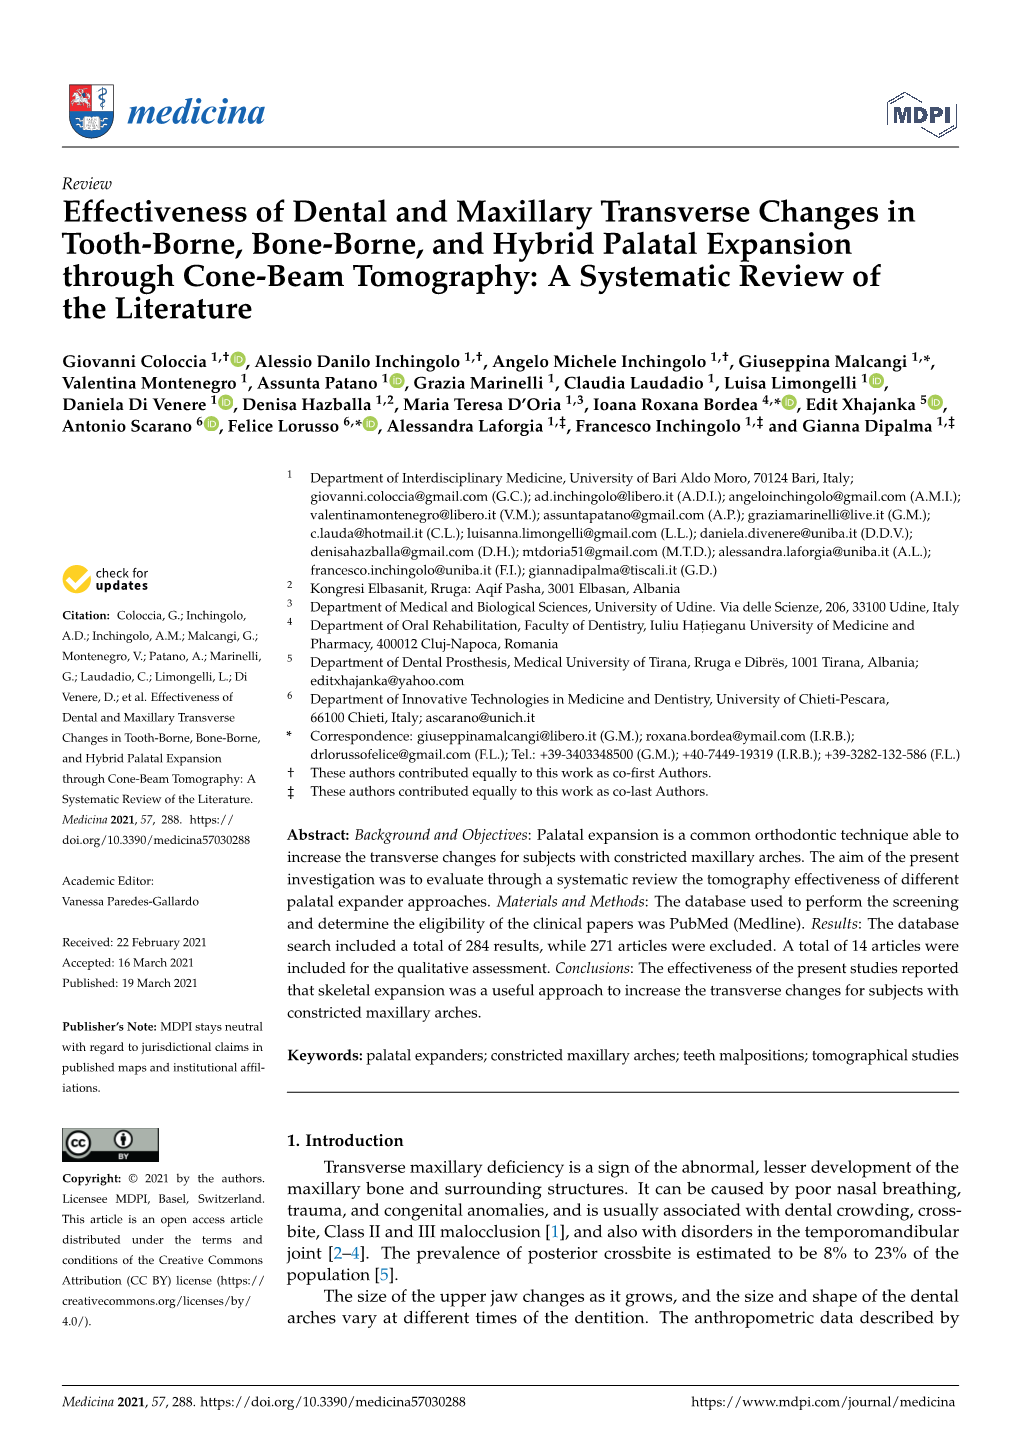 Effectiveness of Dental and Maxillary Transverse Changes in Tooth-Borne, Bone-Borne, and Hybrid Palatal Expansion Through Cone-B